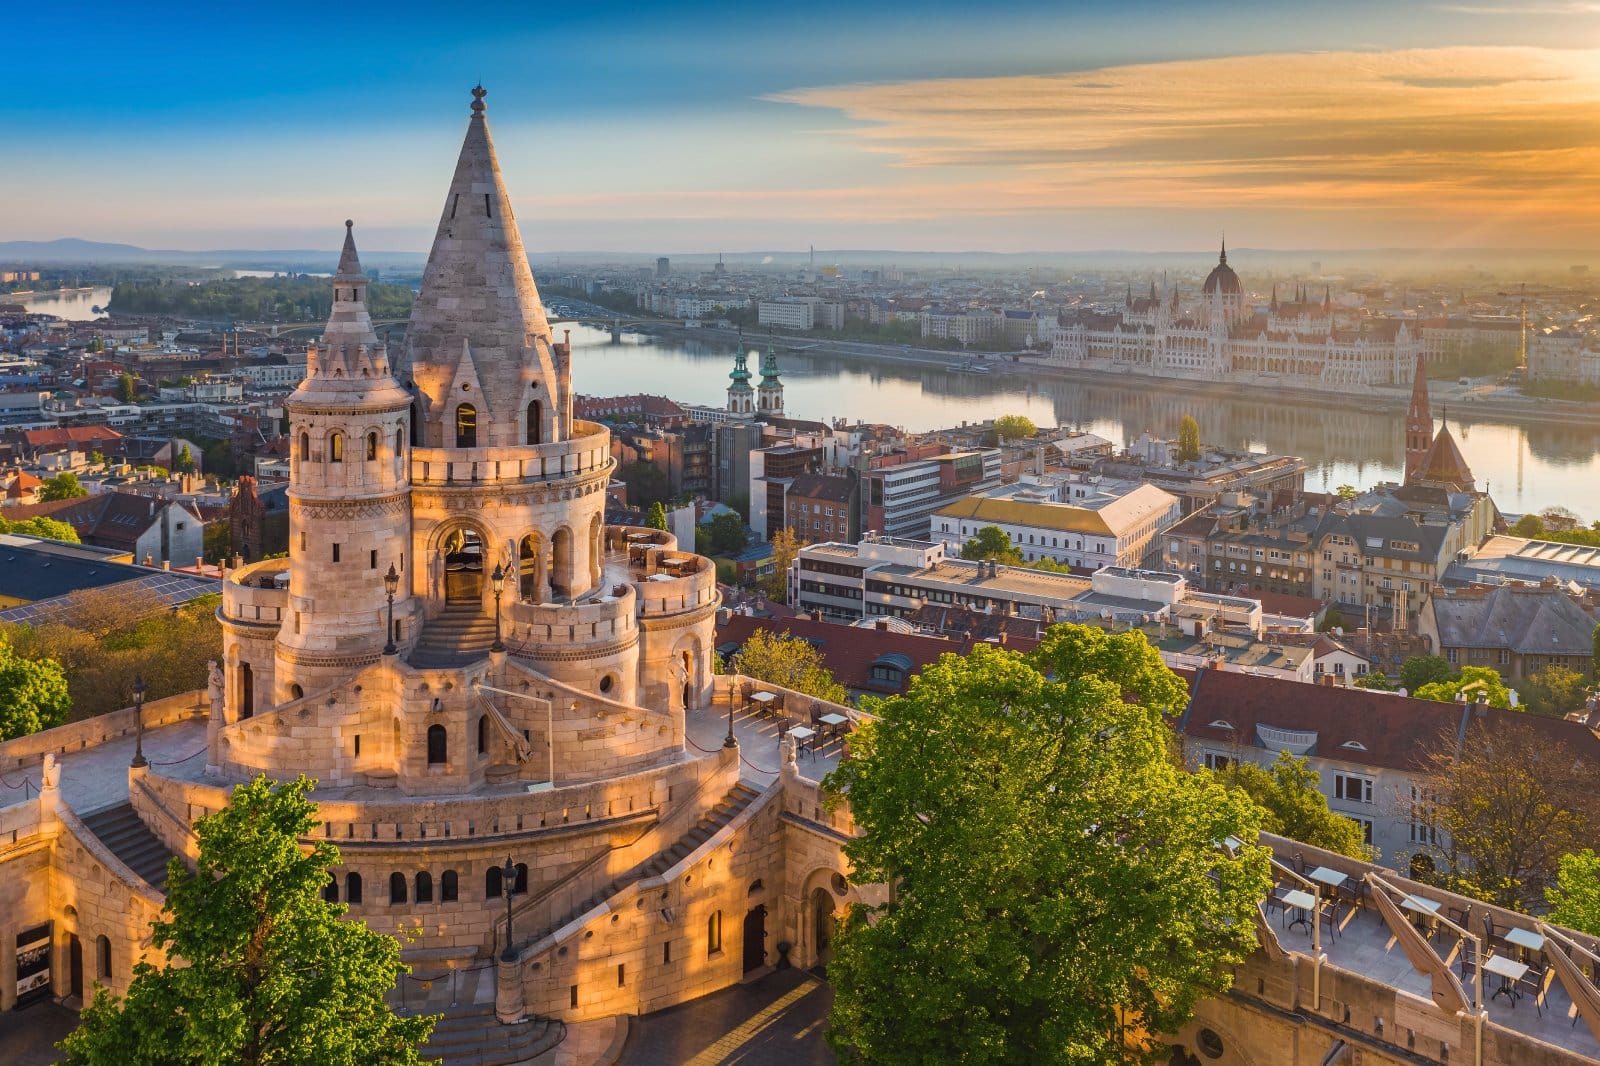 <p>Drumroll, please! Our top spot for budget-friendly expat living in Europe goes to none other than Budapest, the dazzling capital of Hungary. With breathtaking architecture, vibrant culture, and a wallet-friendly cost of living, Budapest is a dream destination for expats looking to live the high life without the high price tag. Rent prices for one-bedroom apartments typically range from $600 to $800 per month, leaving you with plenty of forints to spare for indulging in hearty Hungarian cuisine and exploring the city’s countless attractions.</p>